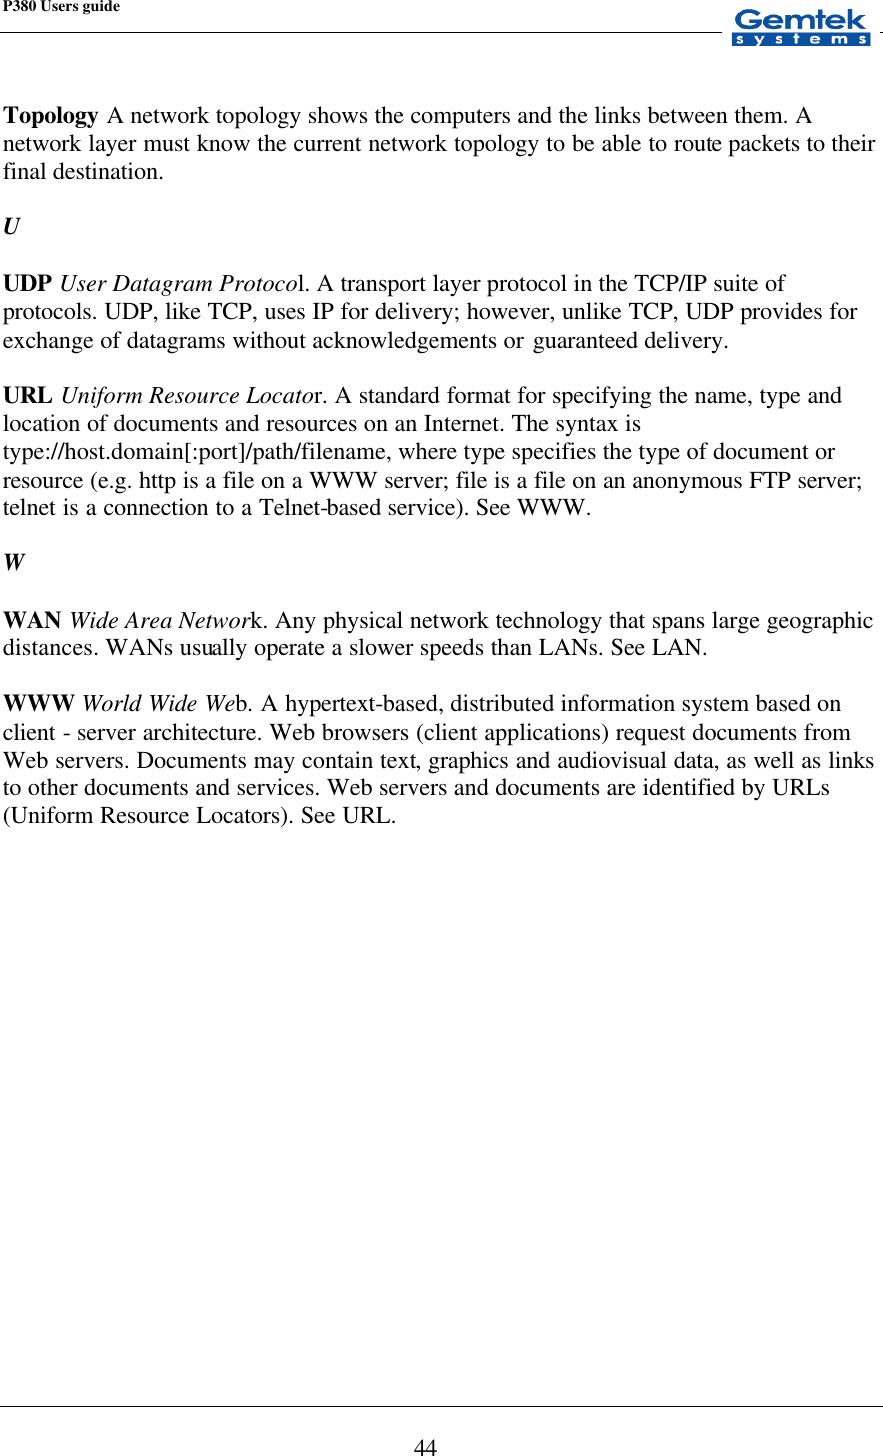 P380 Users guide            44  Topology A network topology shows the computers and the links between them. A network layer must know the current network topology to be able to route packets to their final destination.  U  UDP User Datagram Protocol. A transport layer protocol in the TCP/IP suite of protocols. UDP, like TCP, uses IP for delivery; however, unlike TCP, UDP provides for exchange of datagrams without acknowledgements or guaranteed delivery.  URL Uniform Resource Locator. A standard format for specifying the name, type and location of documents and resources on an Internet. The syntax is type://host.domain[:port]/path/filename, where type specifies the type of document or resource (e.g. http is a file on a WWW server; file is a file on an anonymous FTP server; telnet is a connection to a Telnet-based service). See WWW.  W  WAN Wide Area Network. Any physical network technology that spans large geographic distances. WANs usually operate a slower speeds than LANs. See LAN.  WWW World Wide Web. A hypertext-based, distributed information system based on client - server architecture. Web browsers (client applications) request documents from Web servers. Documents may contain text, graphics and audiovisual data, as well as links to other documents and services. Web servers and documents are identified by URLs (Uniform Resource Locators). See URL.  